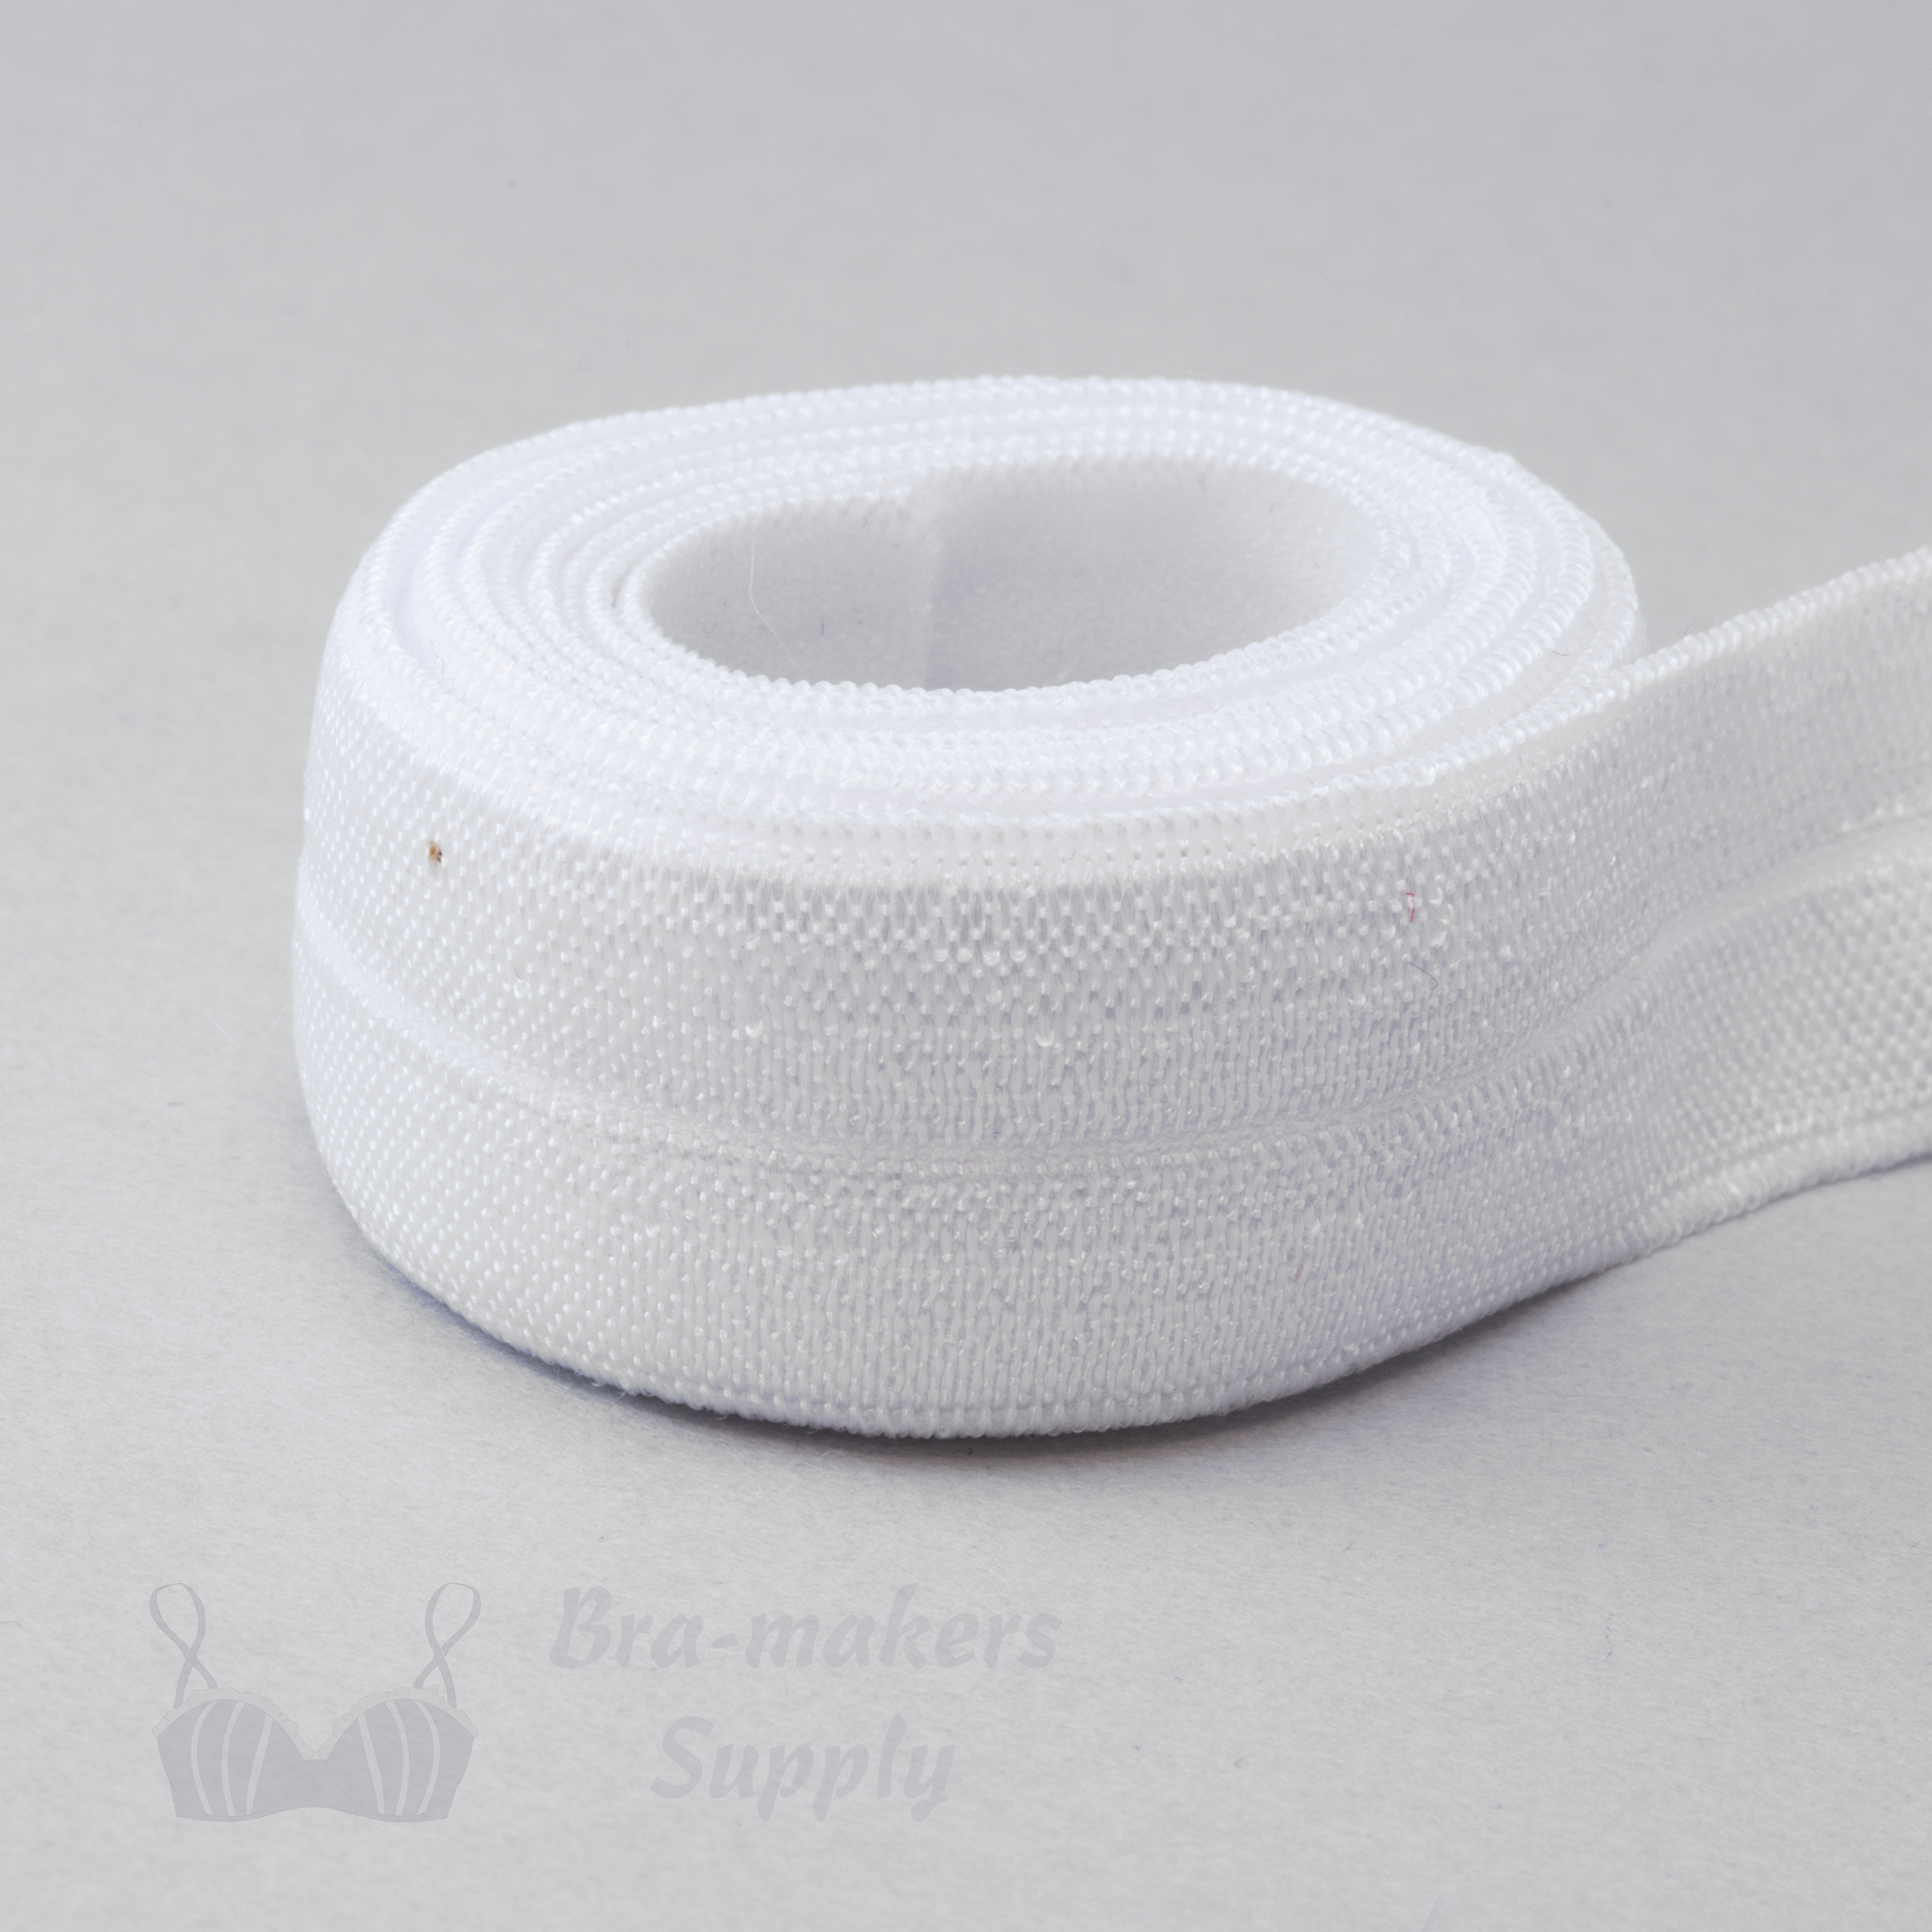 reversible fold-over elastic binding EF-5 white or Pantone 11-0601 Bright White from Bra-Makers Supply 1 metre roll shown